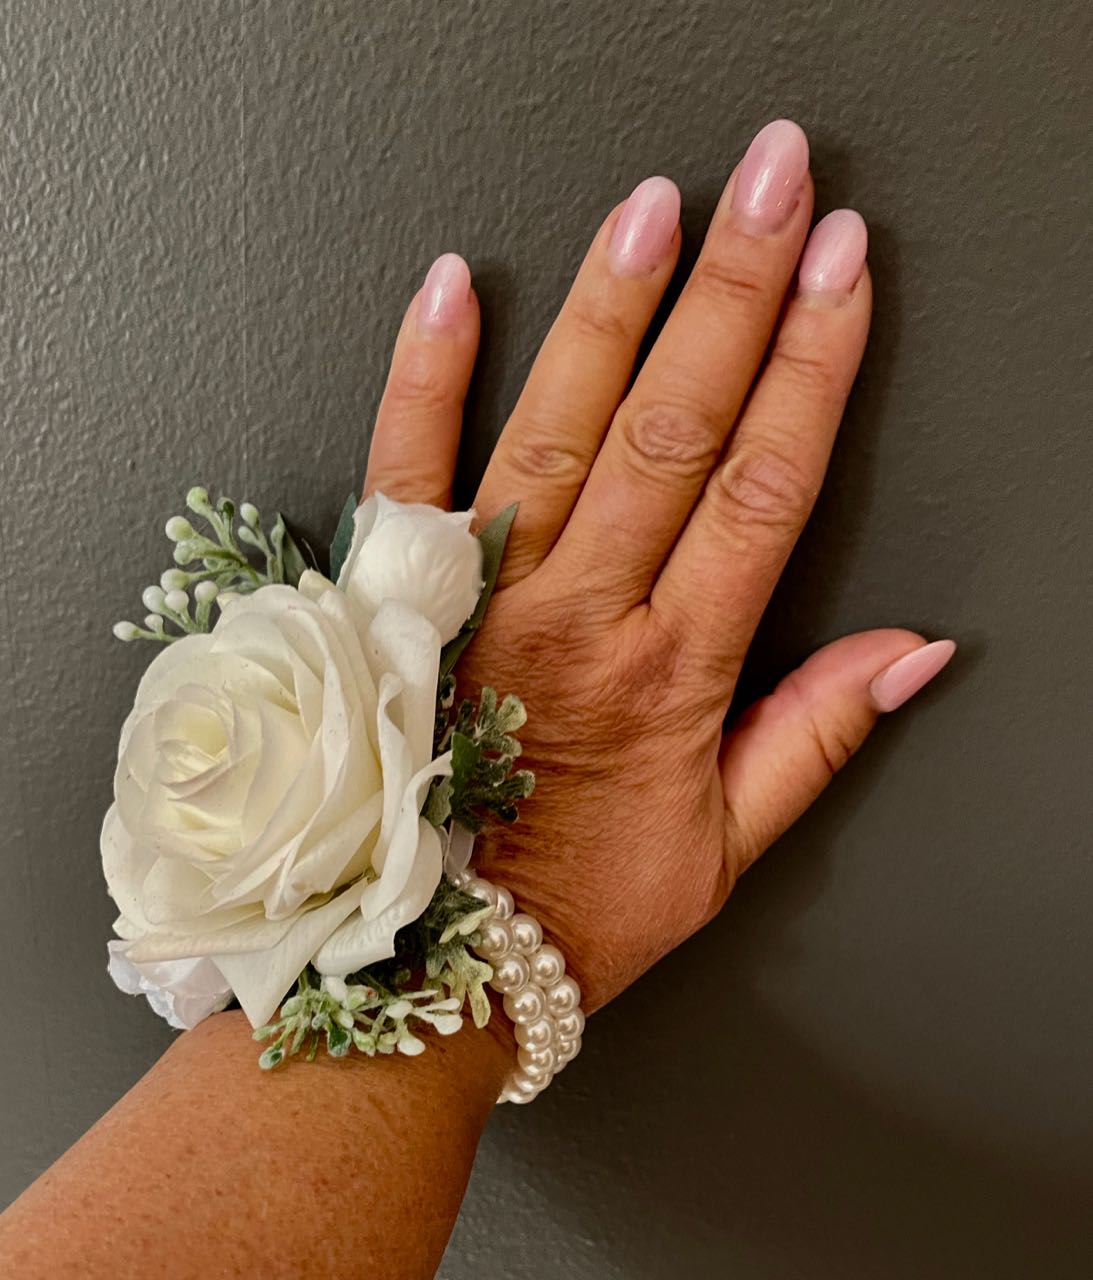 Corsage from the sage eucalyptus and white collection! One-size-fits-all dual strand pearl bracelet includes a flawless white rose, nestled between two sage green leaves and sprigs of dusty miller and two mini rose buds.